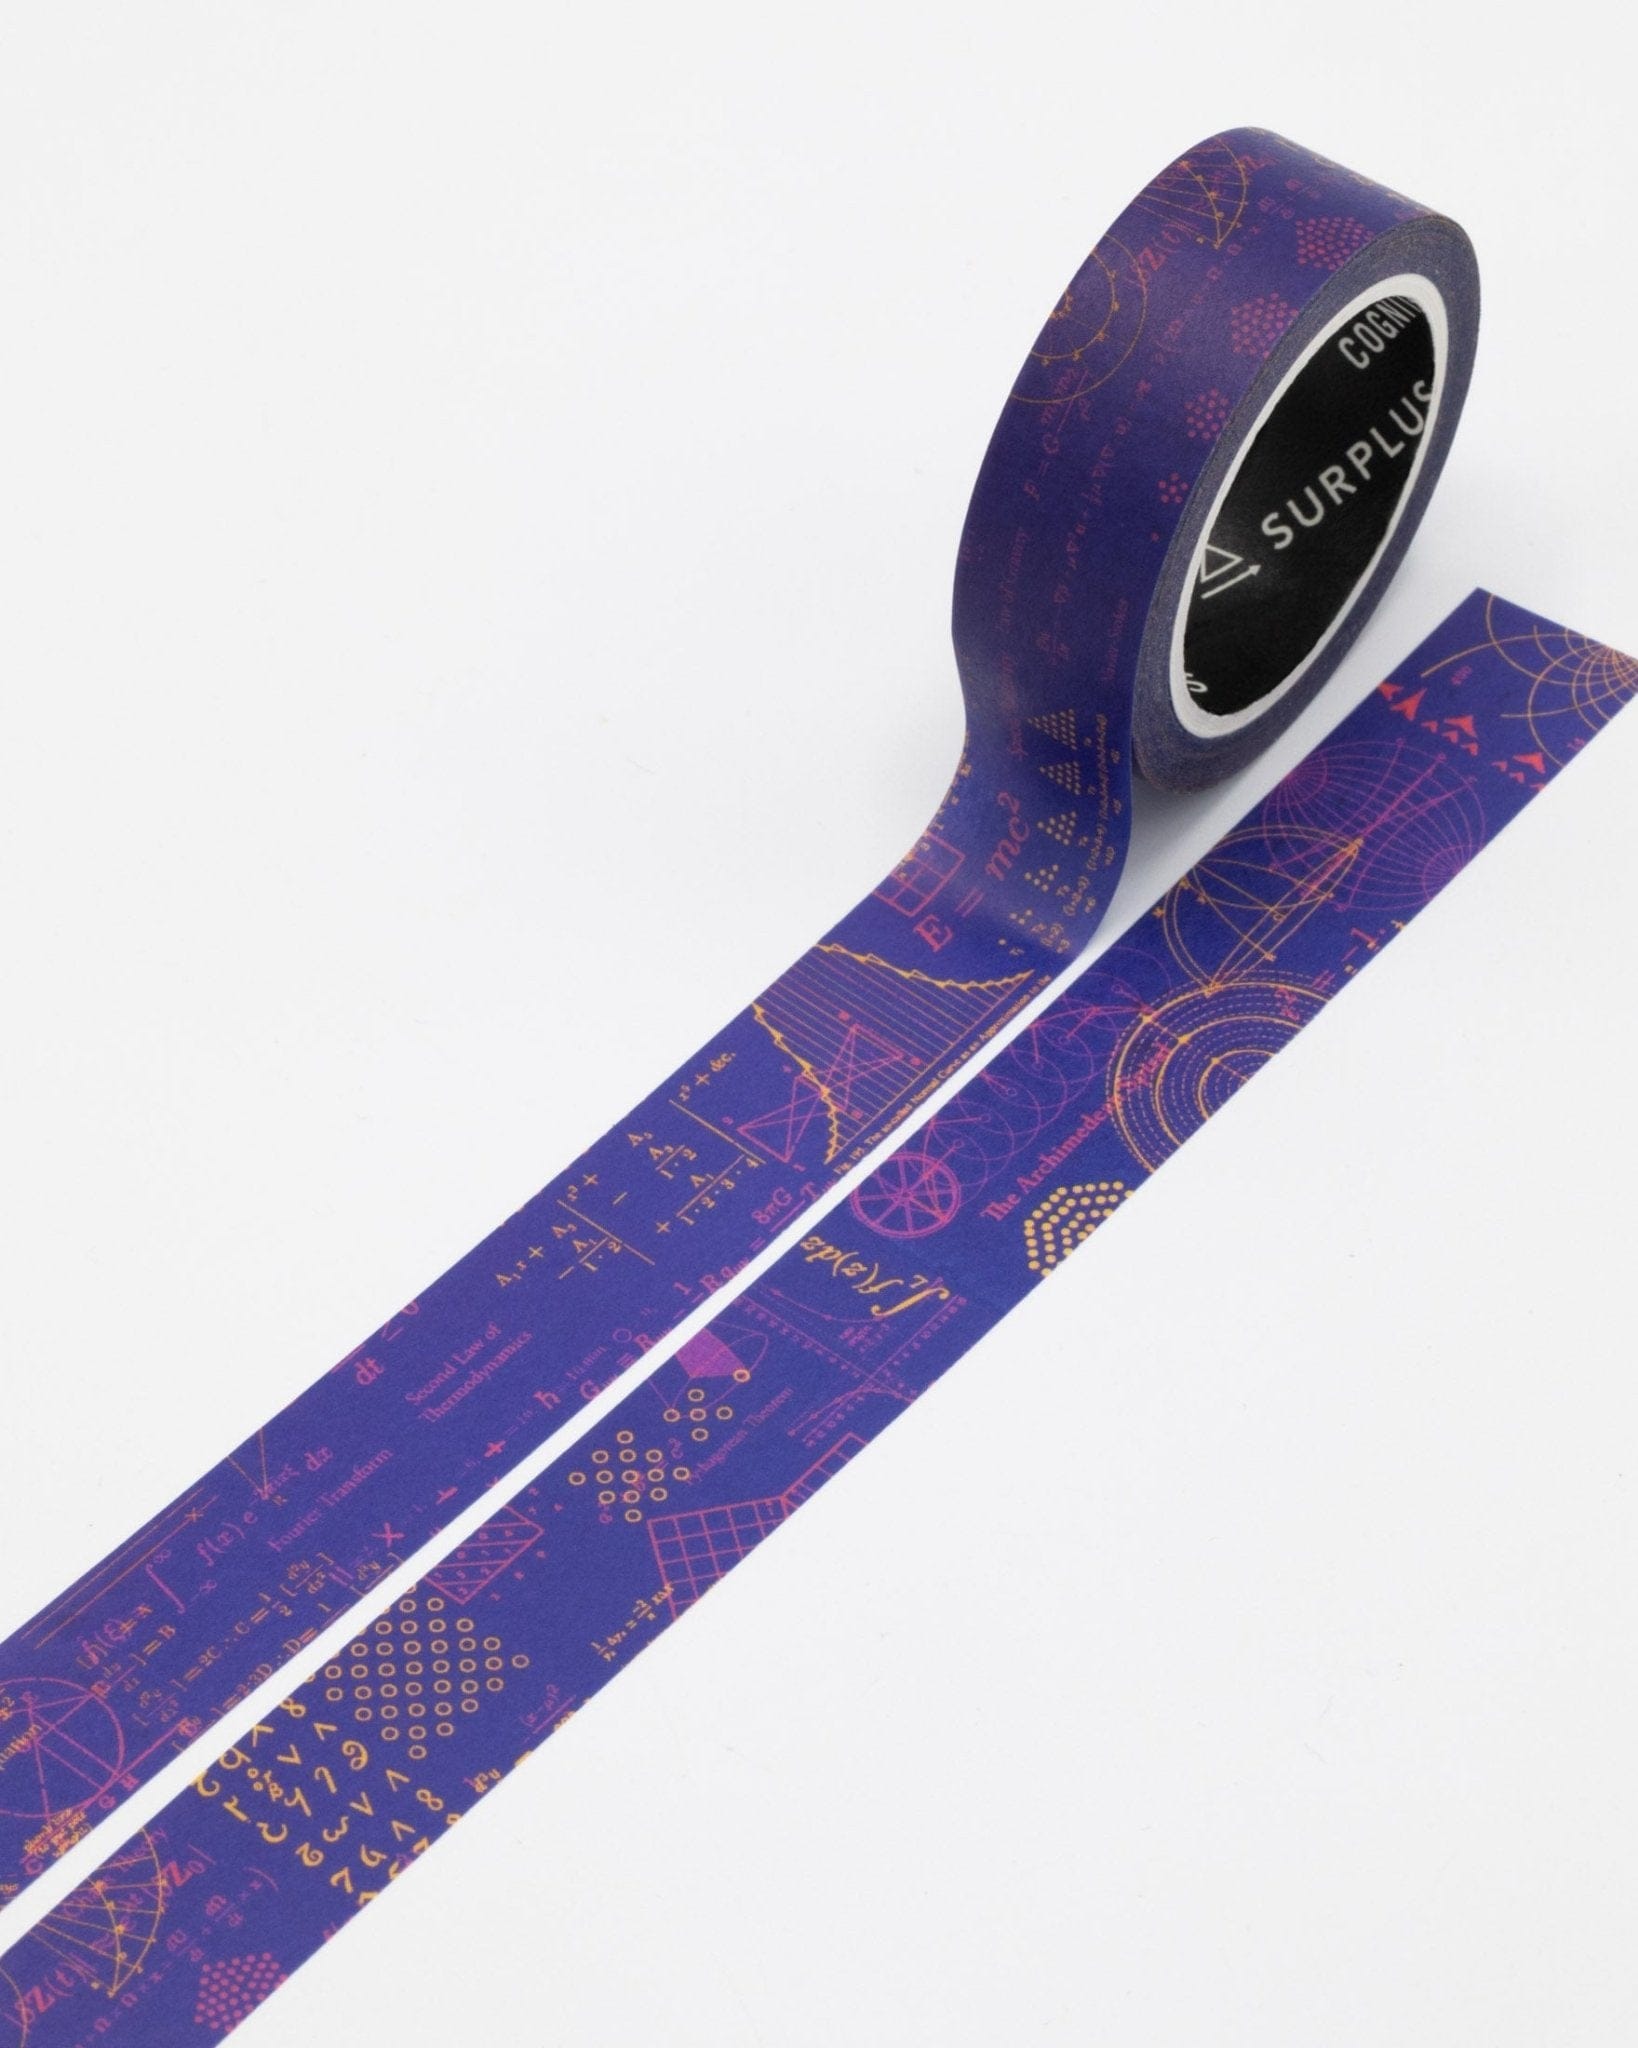 Equations That Changed the World Washi Tape Cognitive Surplus